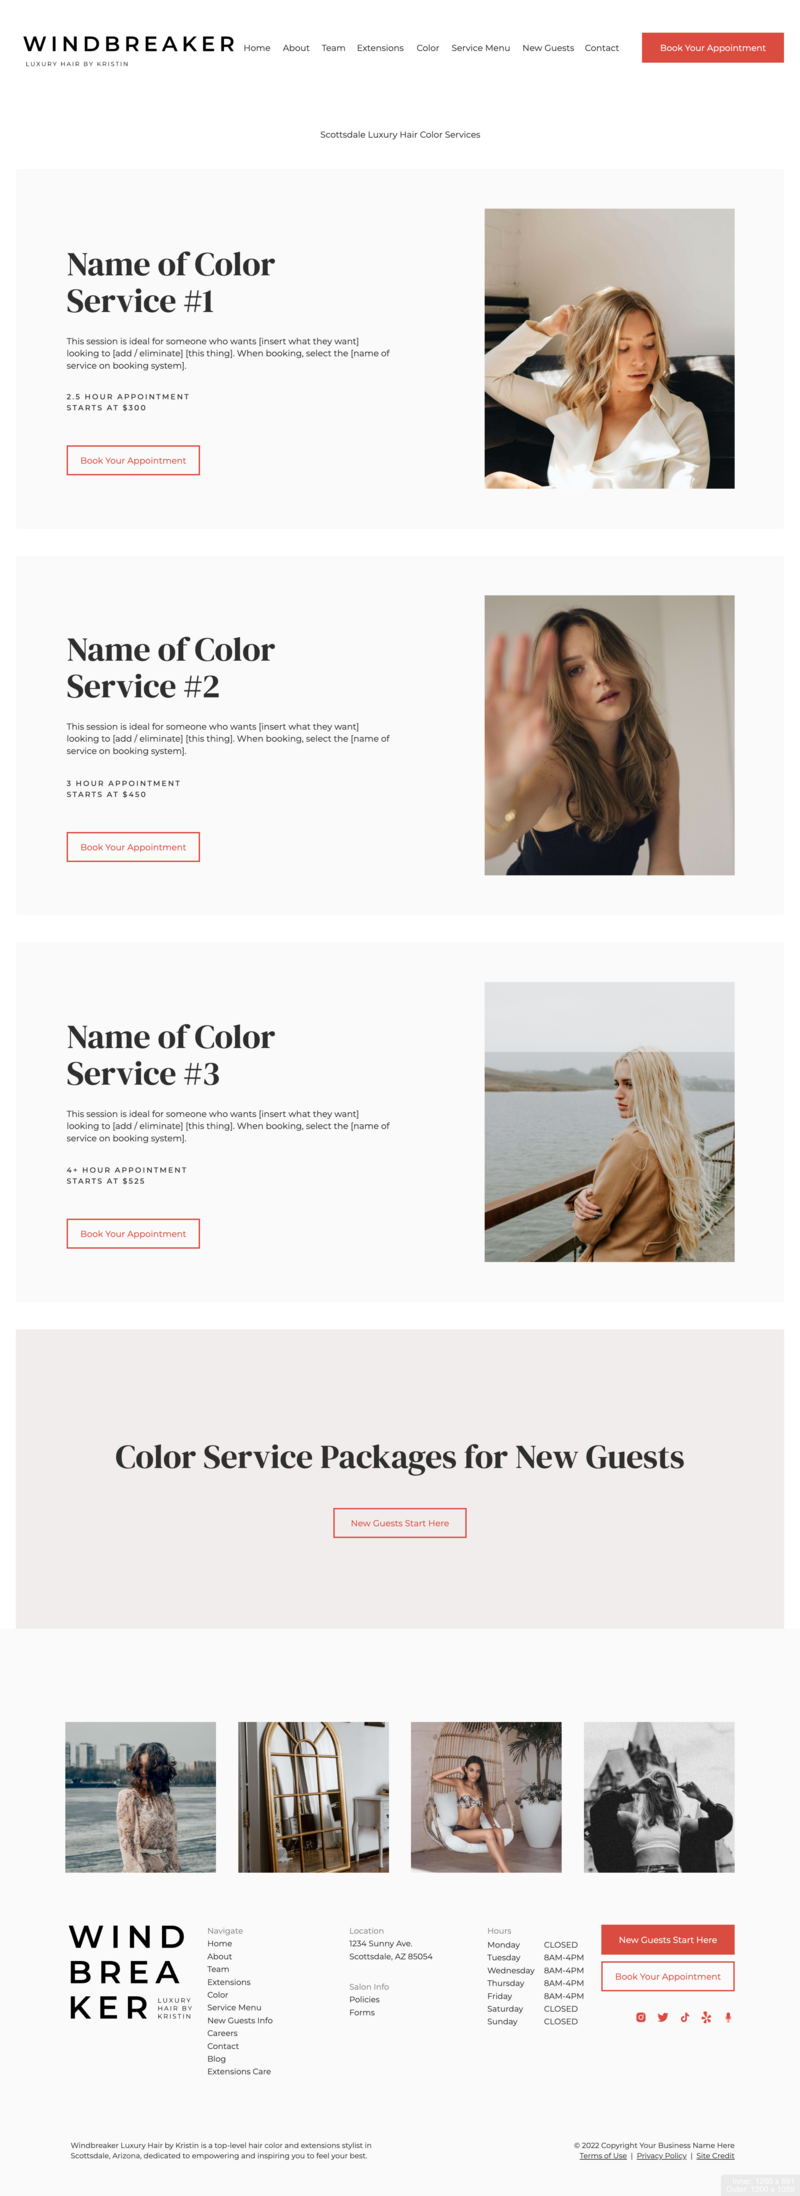 website-template-for-hair-stylists-salons-windbreaker-franklinandwillow-color-13_33_39